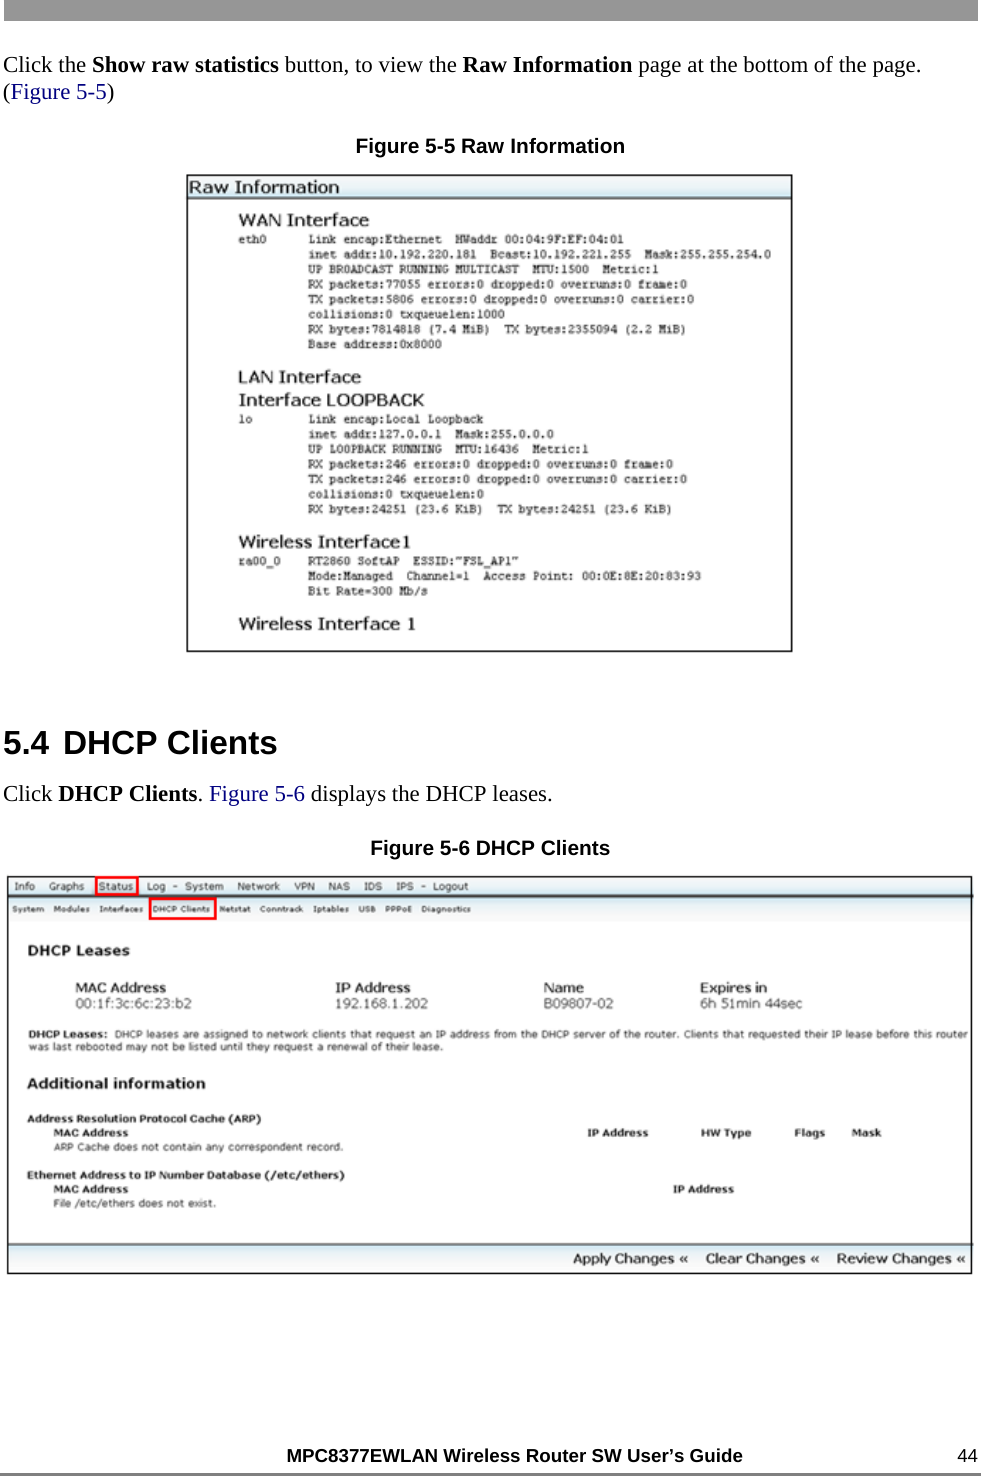                                                          MPC8377EWLAN Wireless Router SW User’s Guide    44 Click the Show raw statistics button, to view the Raw Information page at the bottom of the page. (Figure 5-5) Figure 5-5 Raw Information  5.4 DHCP Clients Click DHCP Clients. Figure 5-6 displays the DHCP leases. Figure 5-6 DHCP Clients  